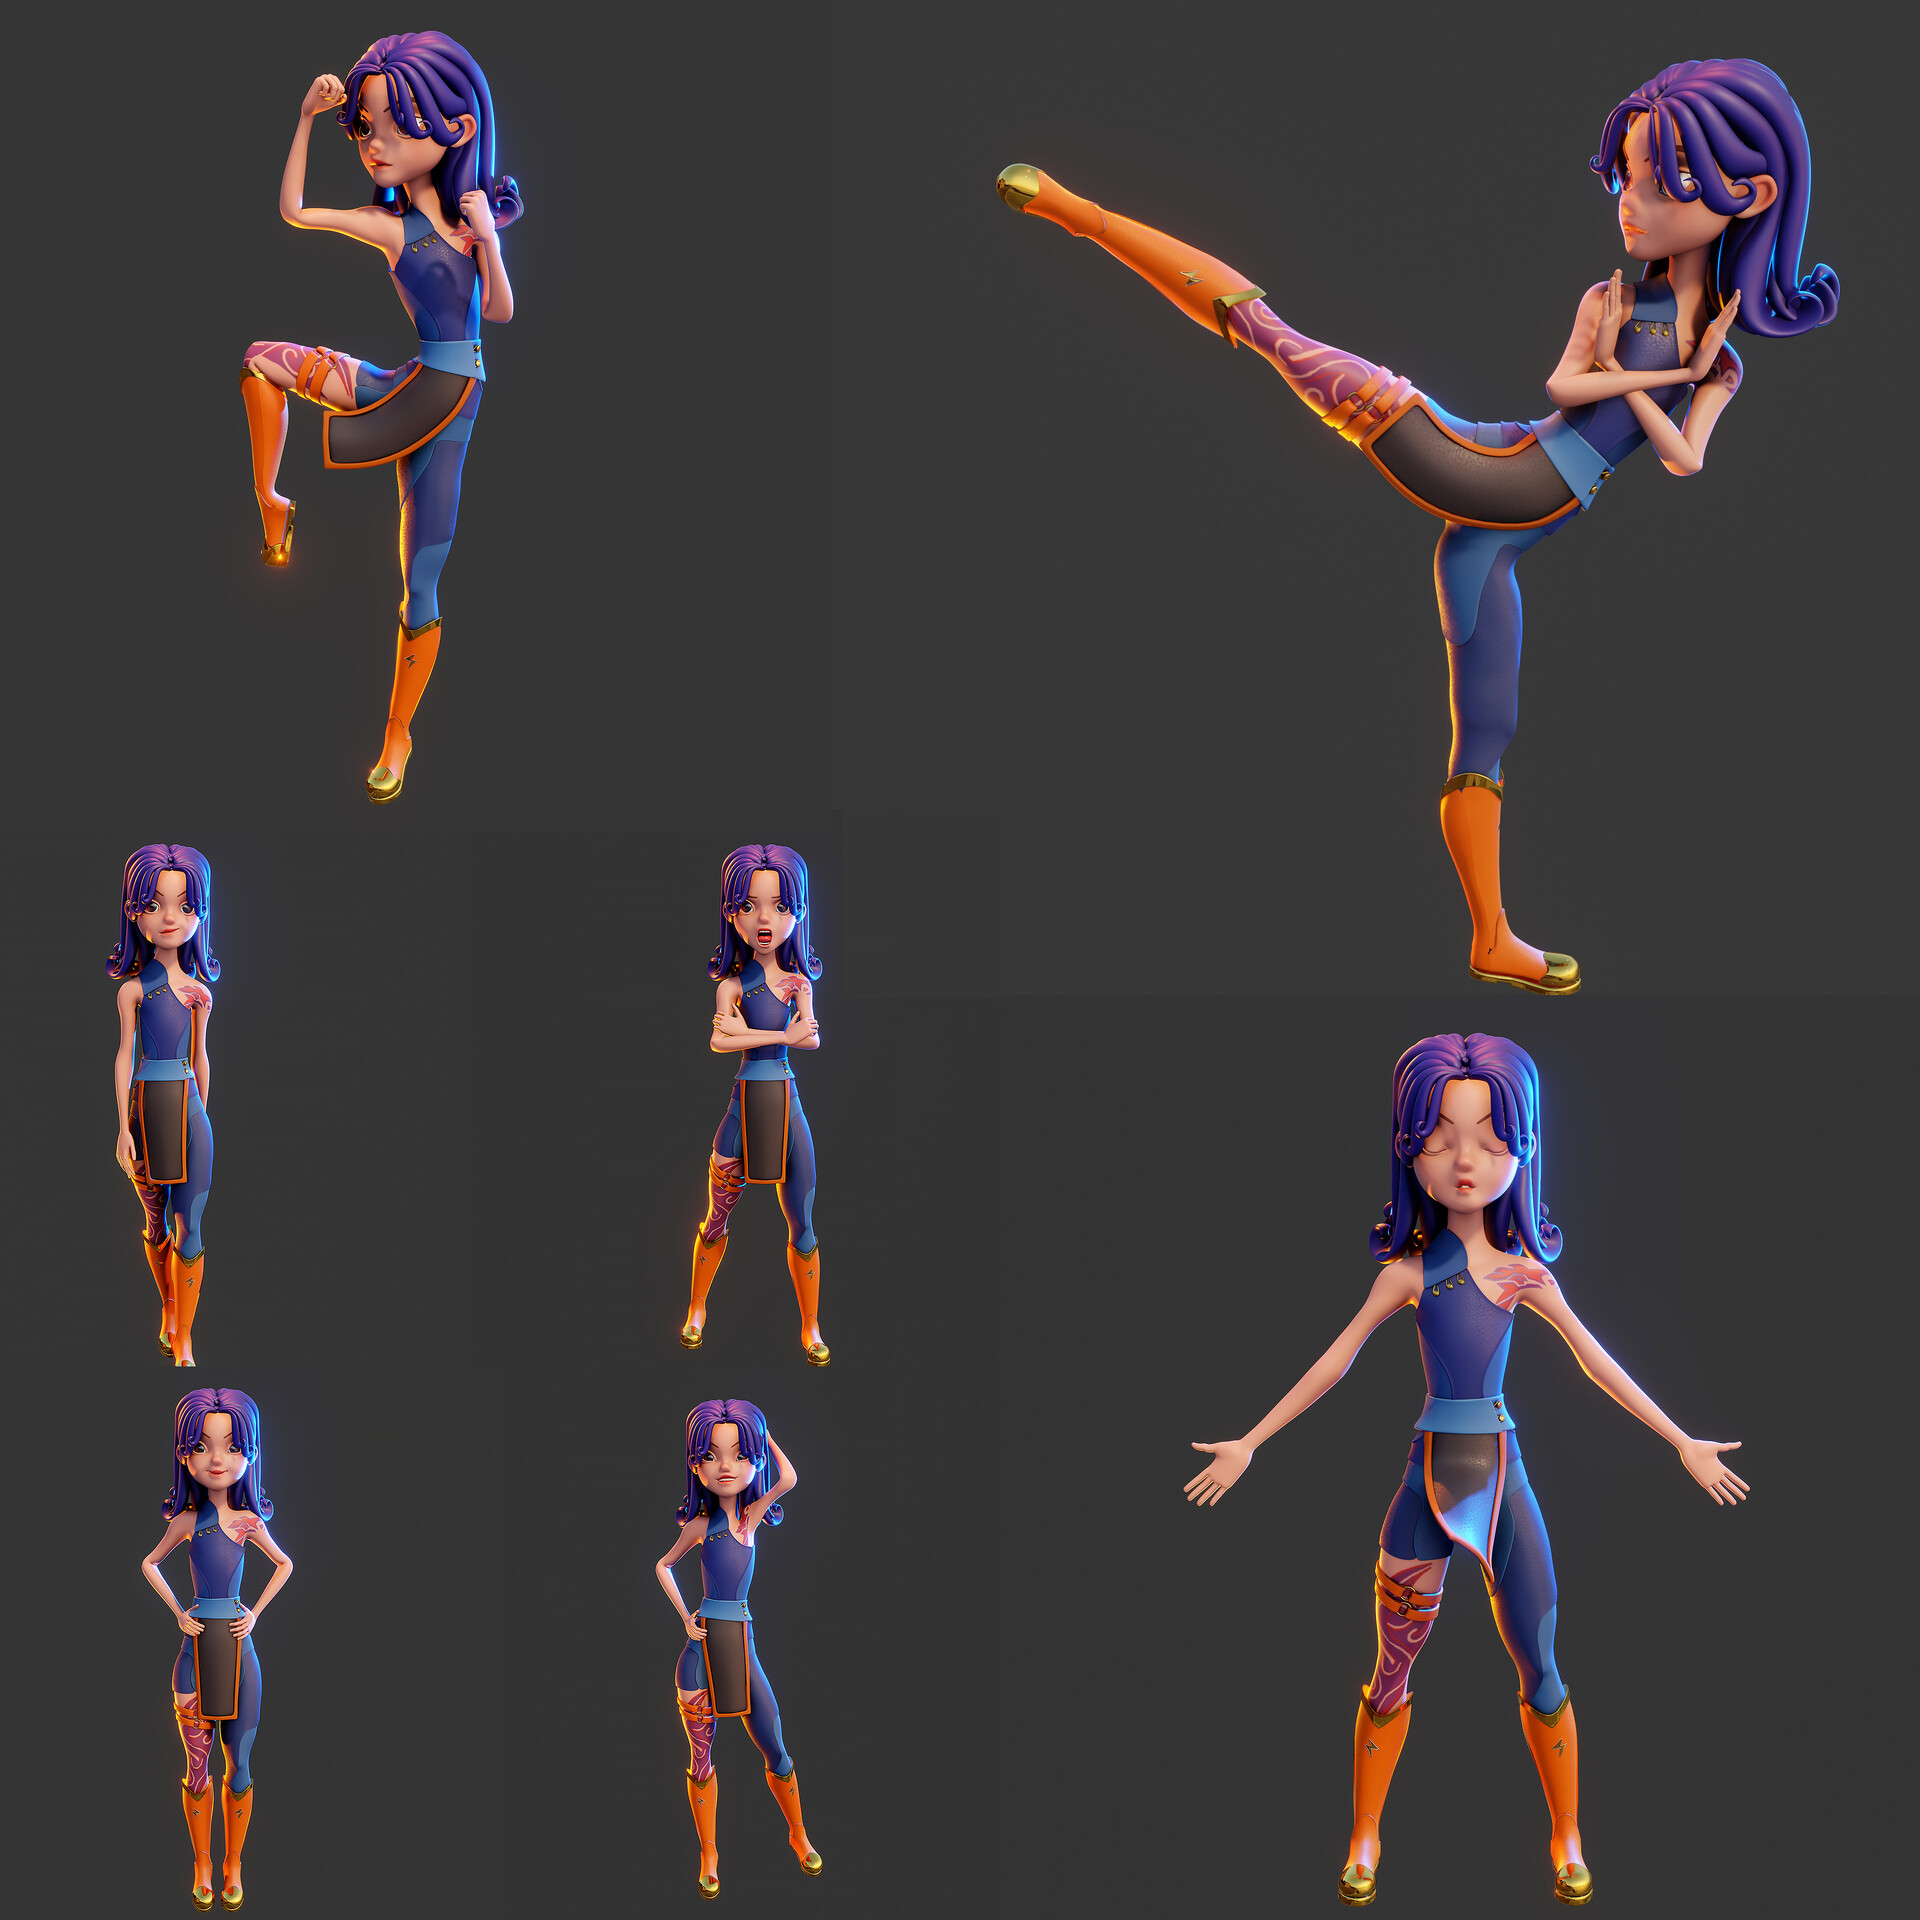 ArtStation - Rigged Stylized Girl - DinaStyle 1 With Clothes - Blender